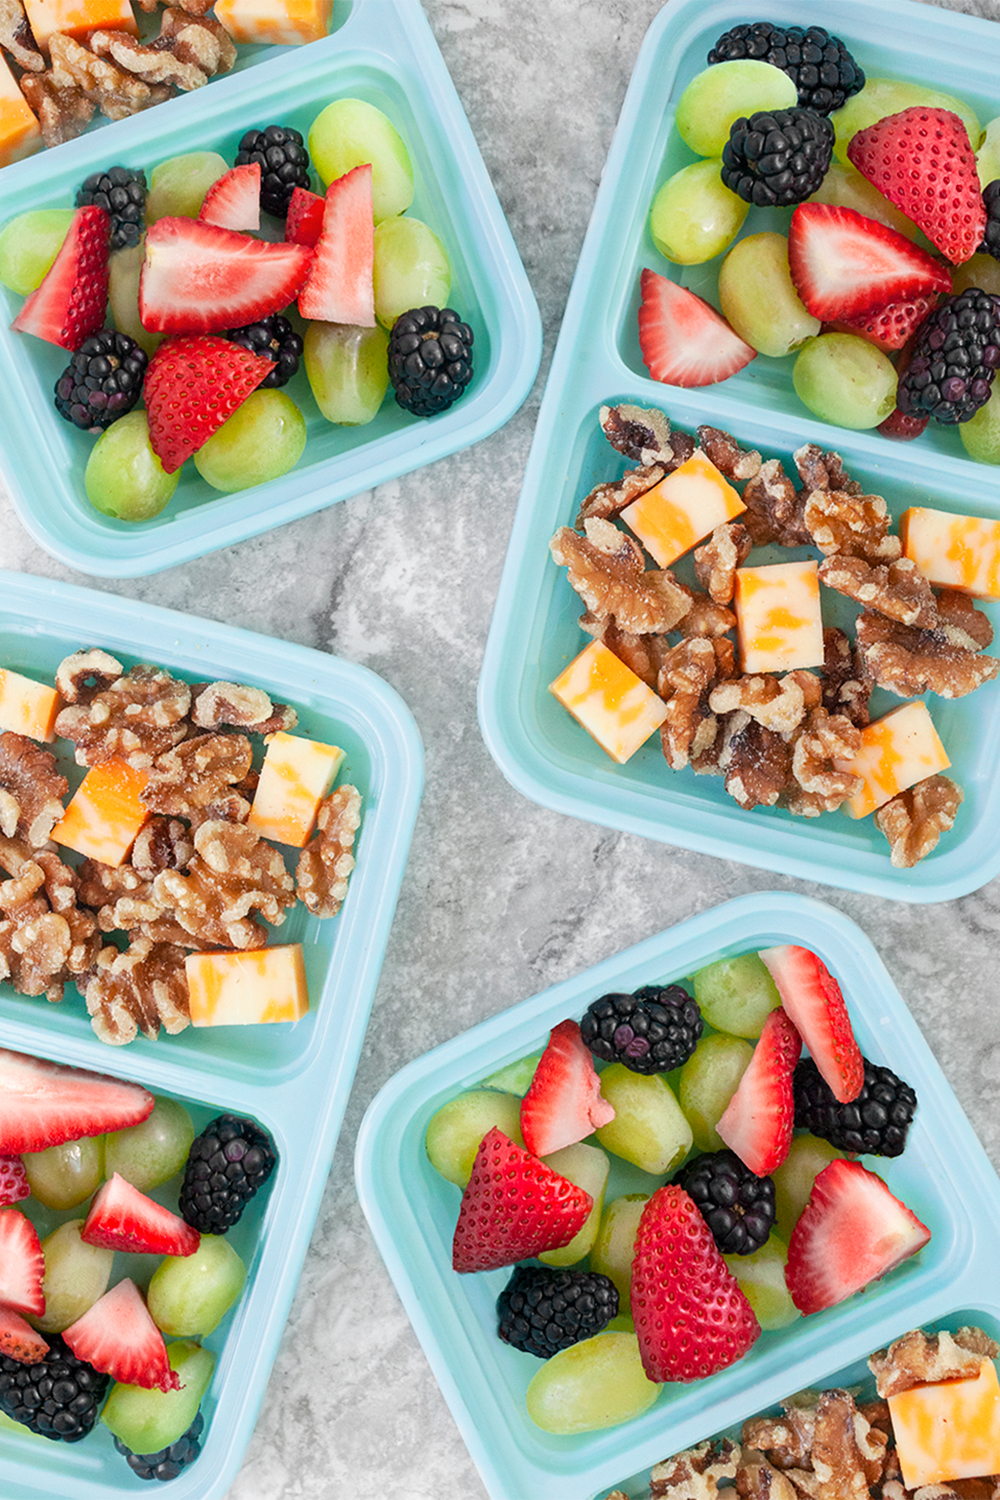 DIY Fruit & Protein Snack Boxes